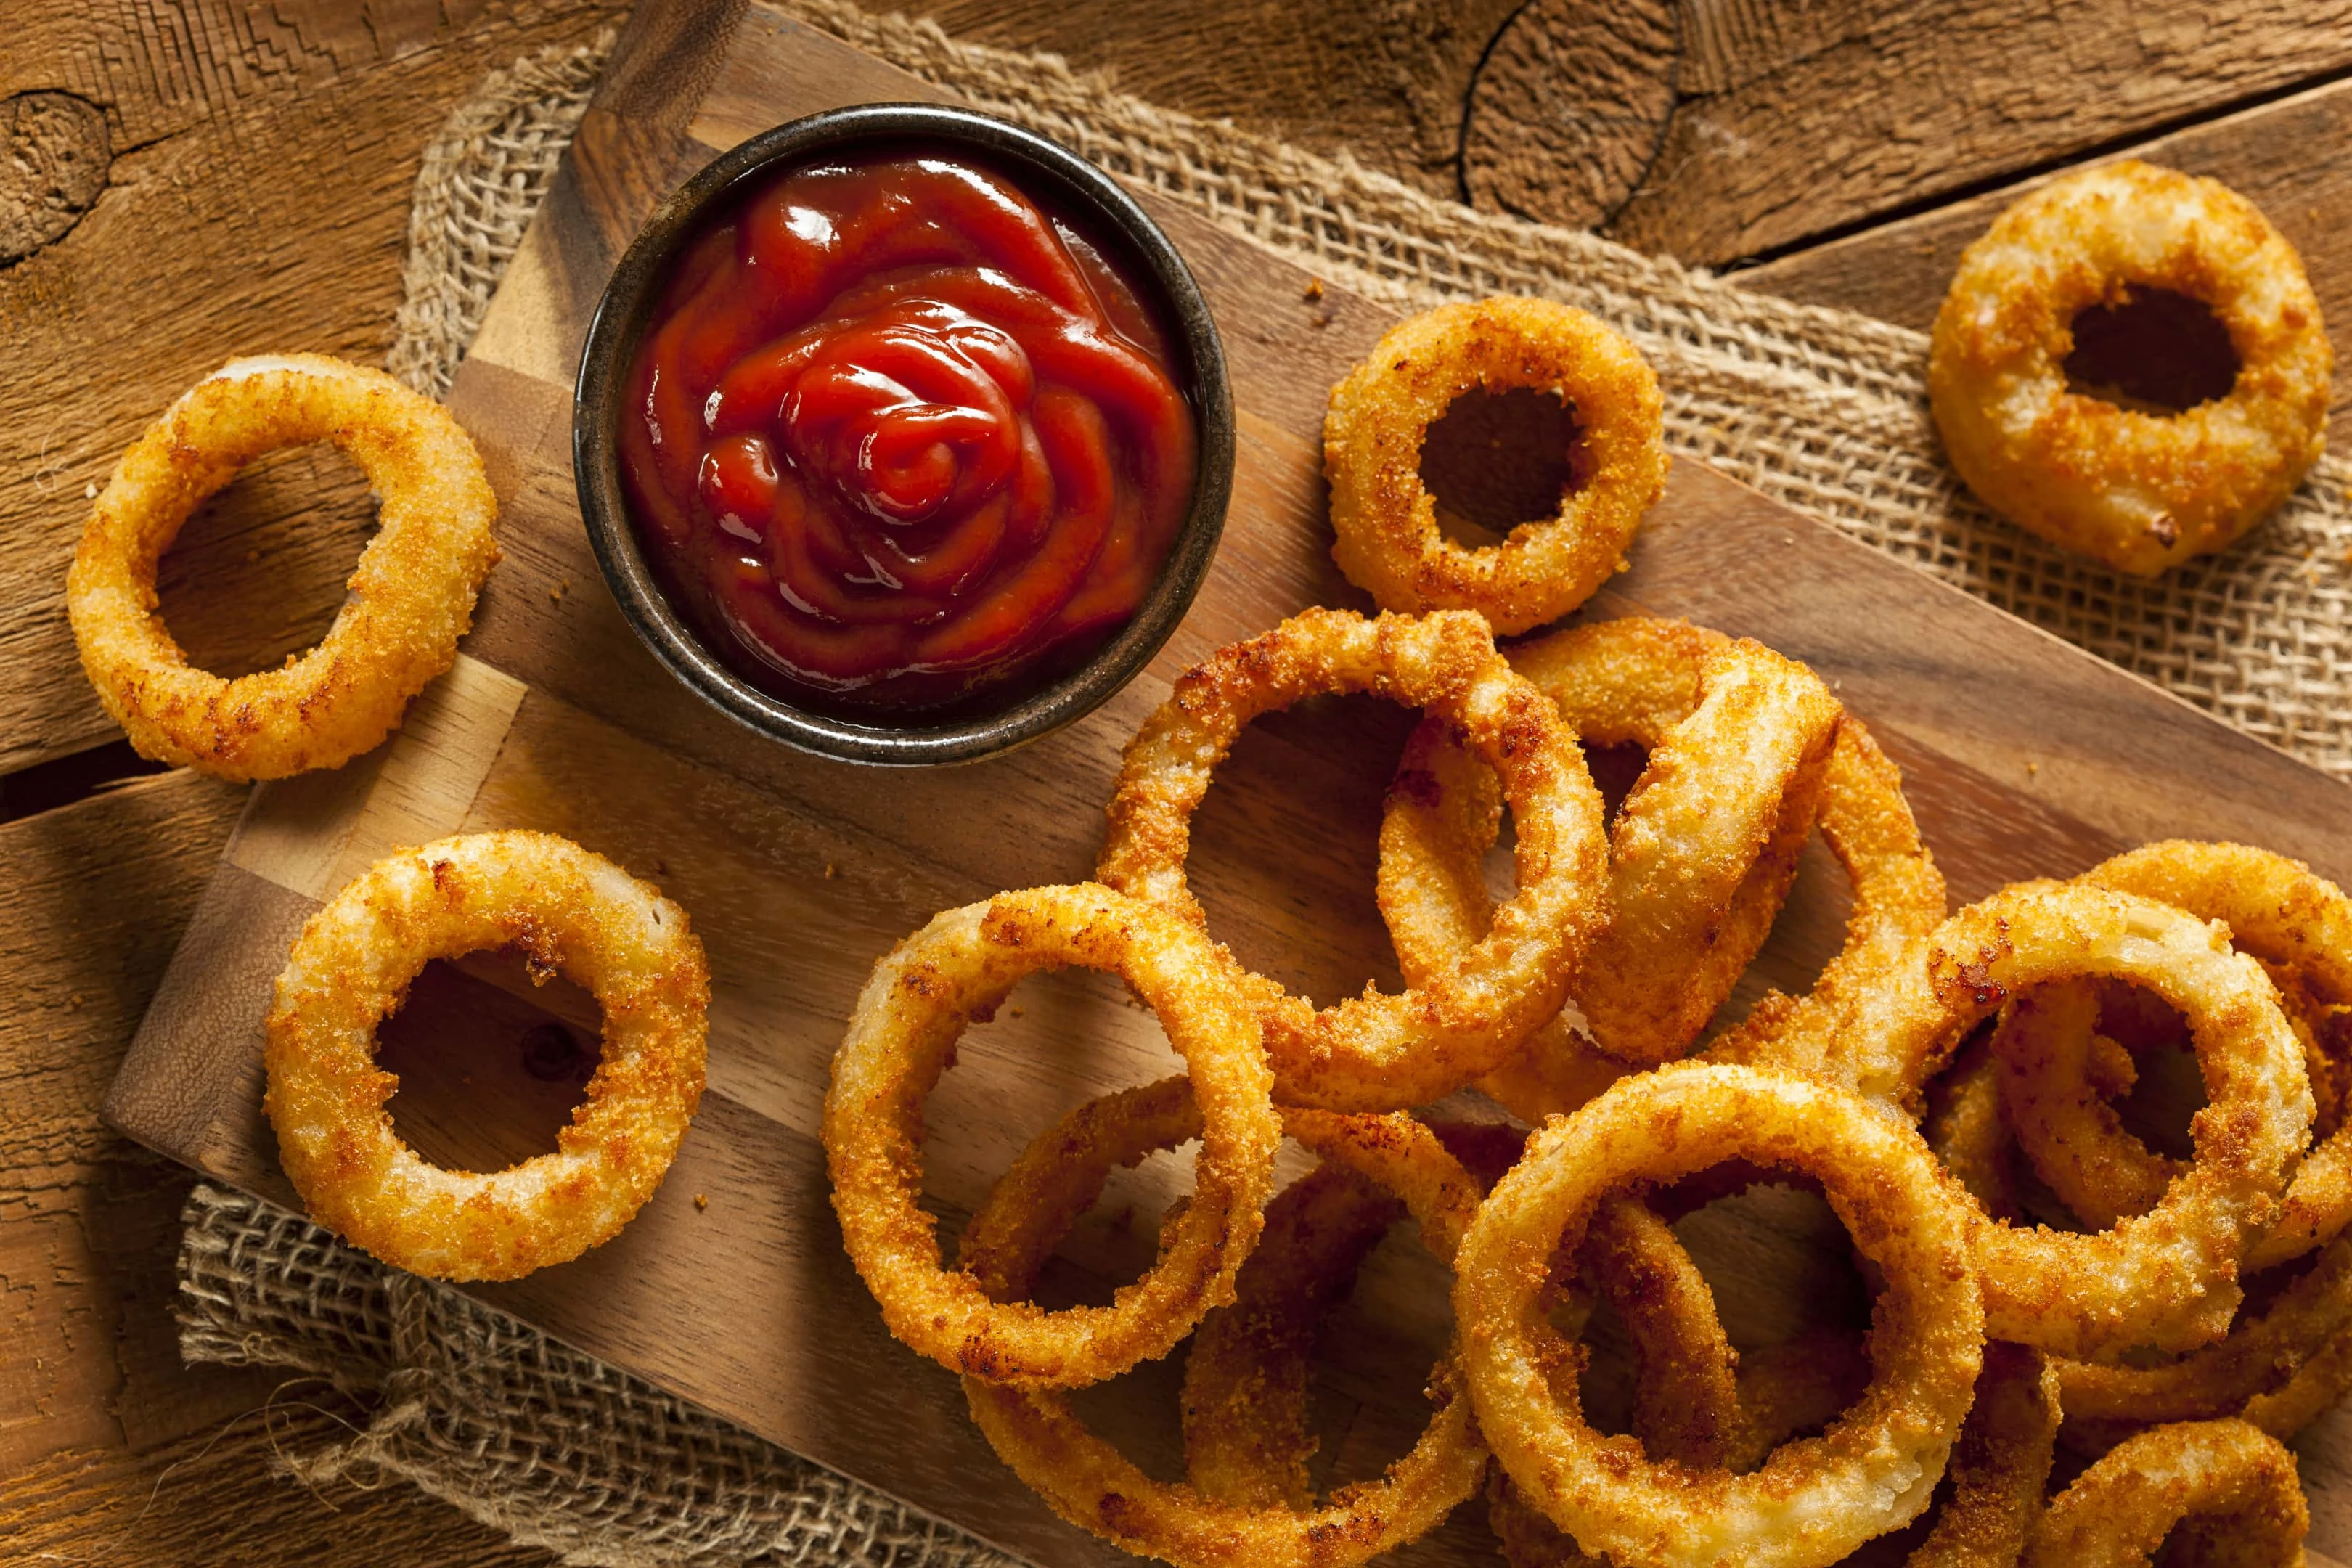 Homemade crunchy fried onion rings on wooden board